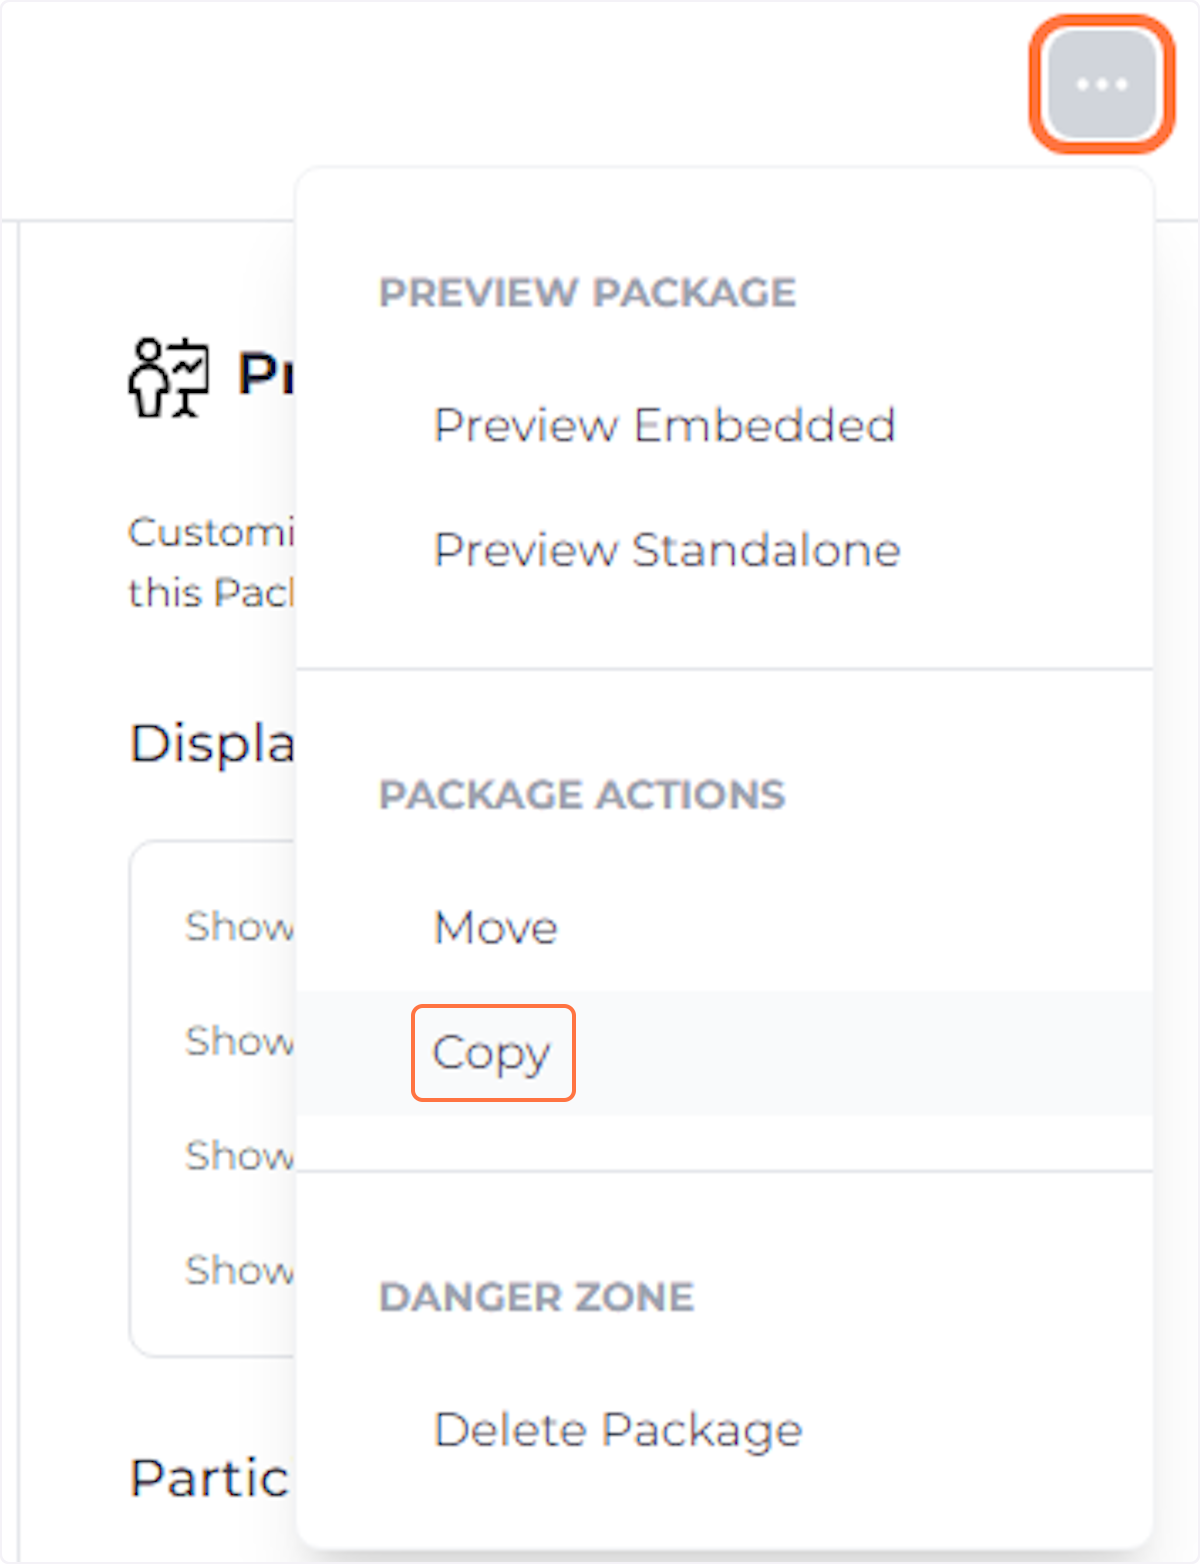 Open the 'Package Actions' menu and click 'Copy'.